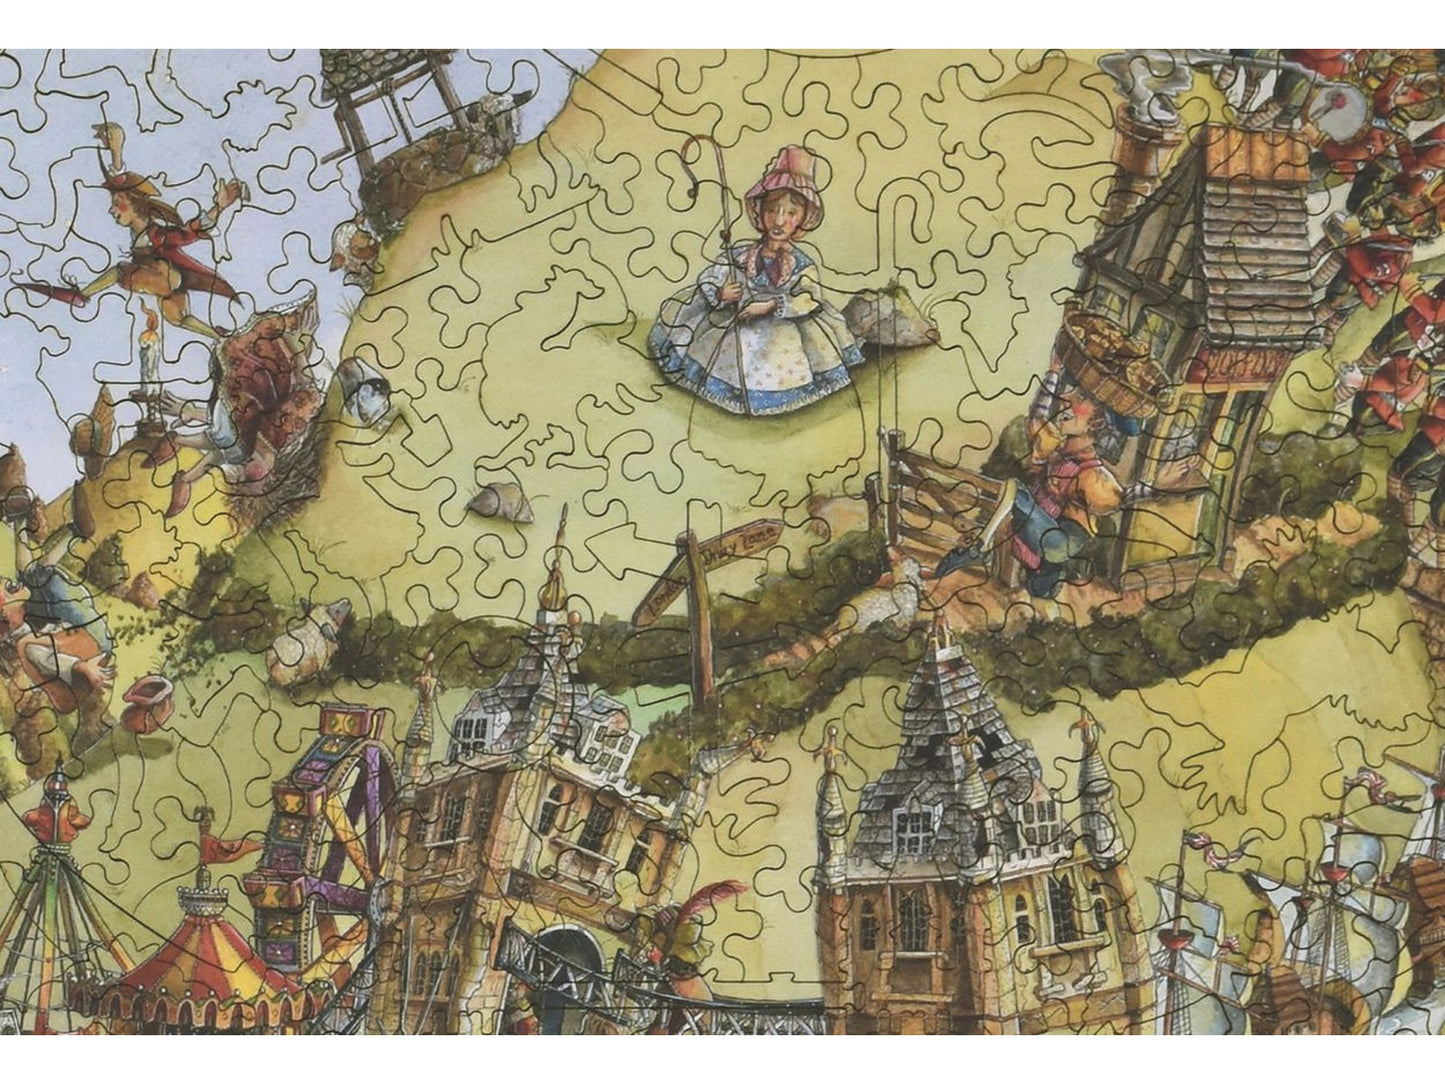 A closeup of the front of the puzzle, Valley of Rhyme, showing the detail in the pieces.